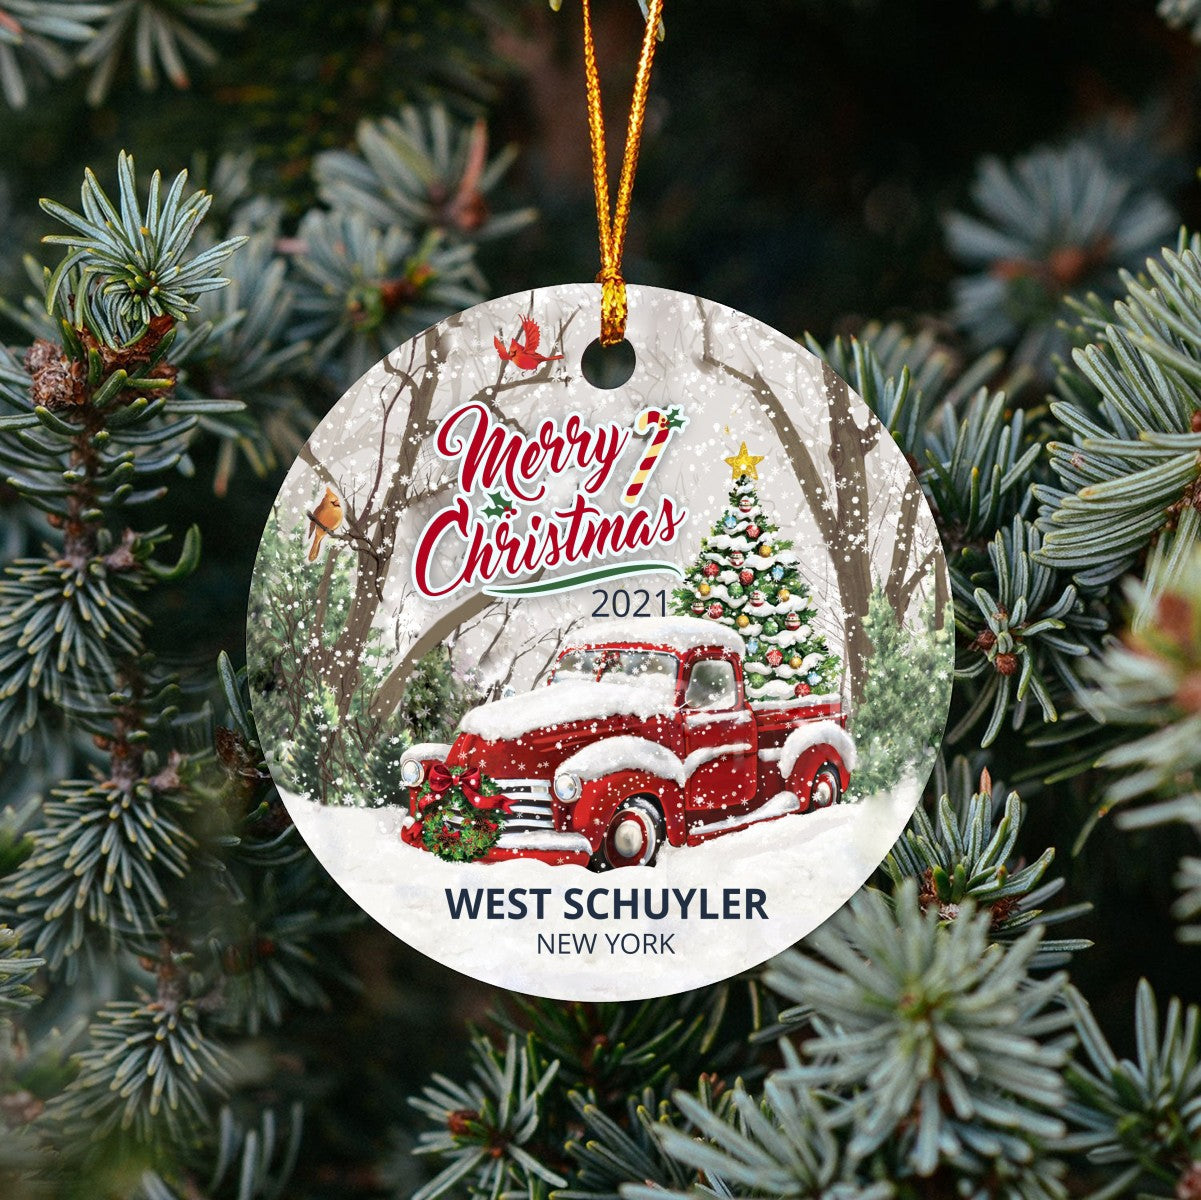 Christmas Tree Ornaments West Schuyler - Ornament With Name City, State West Schuyler New York NY Ornament - Red Truck Xmas Ornaments 3'' Plastic Gift For Family, Friend And Housewarming